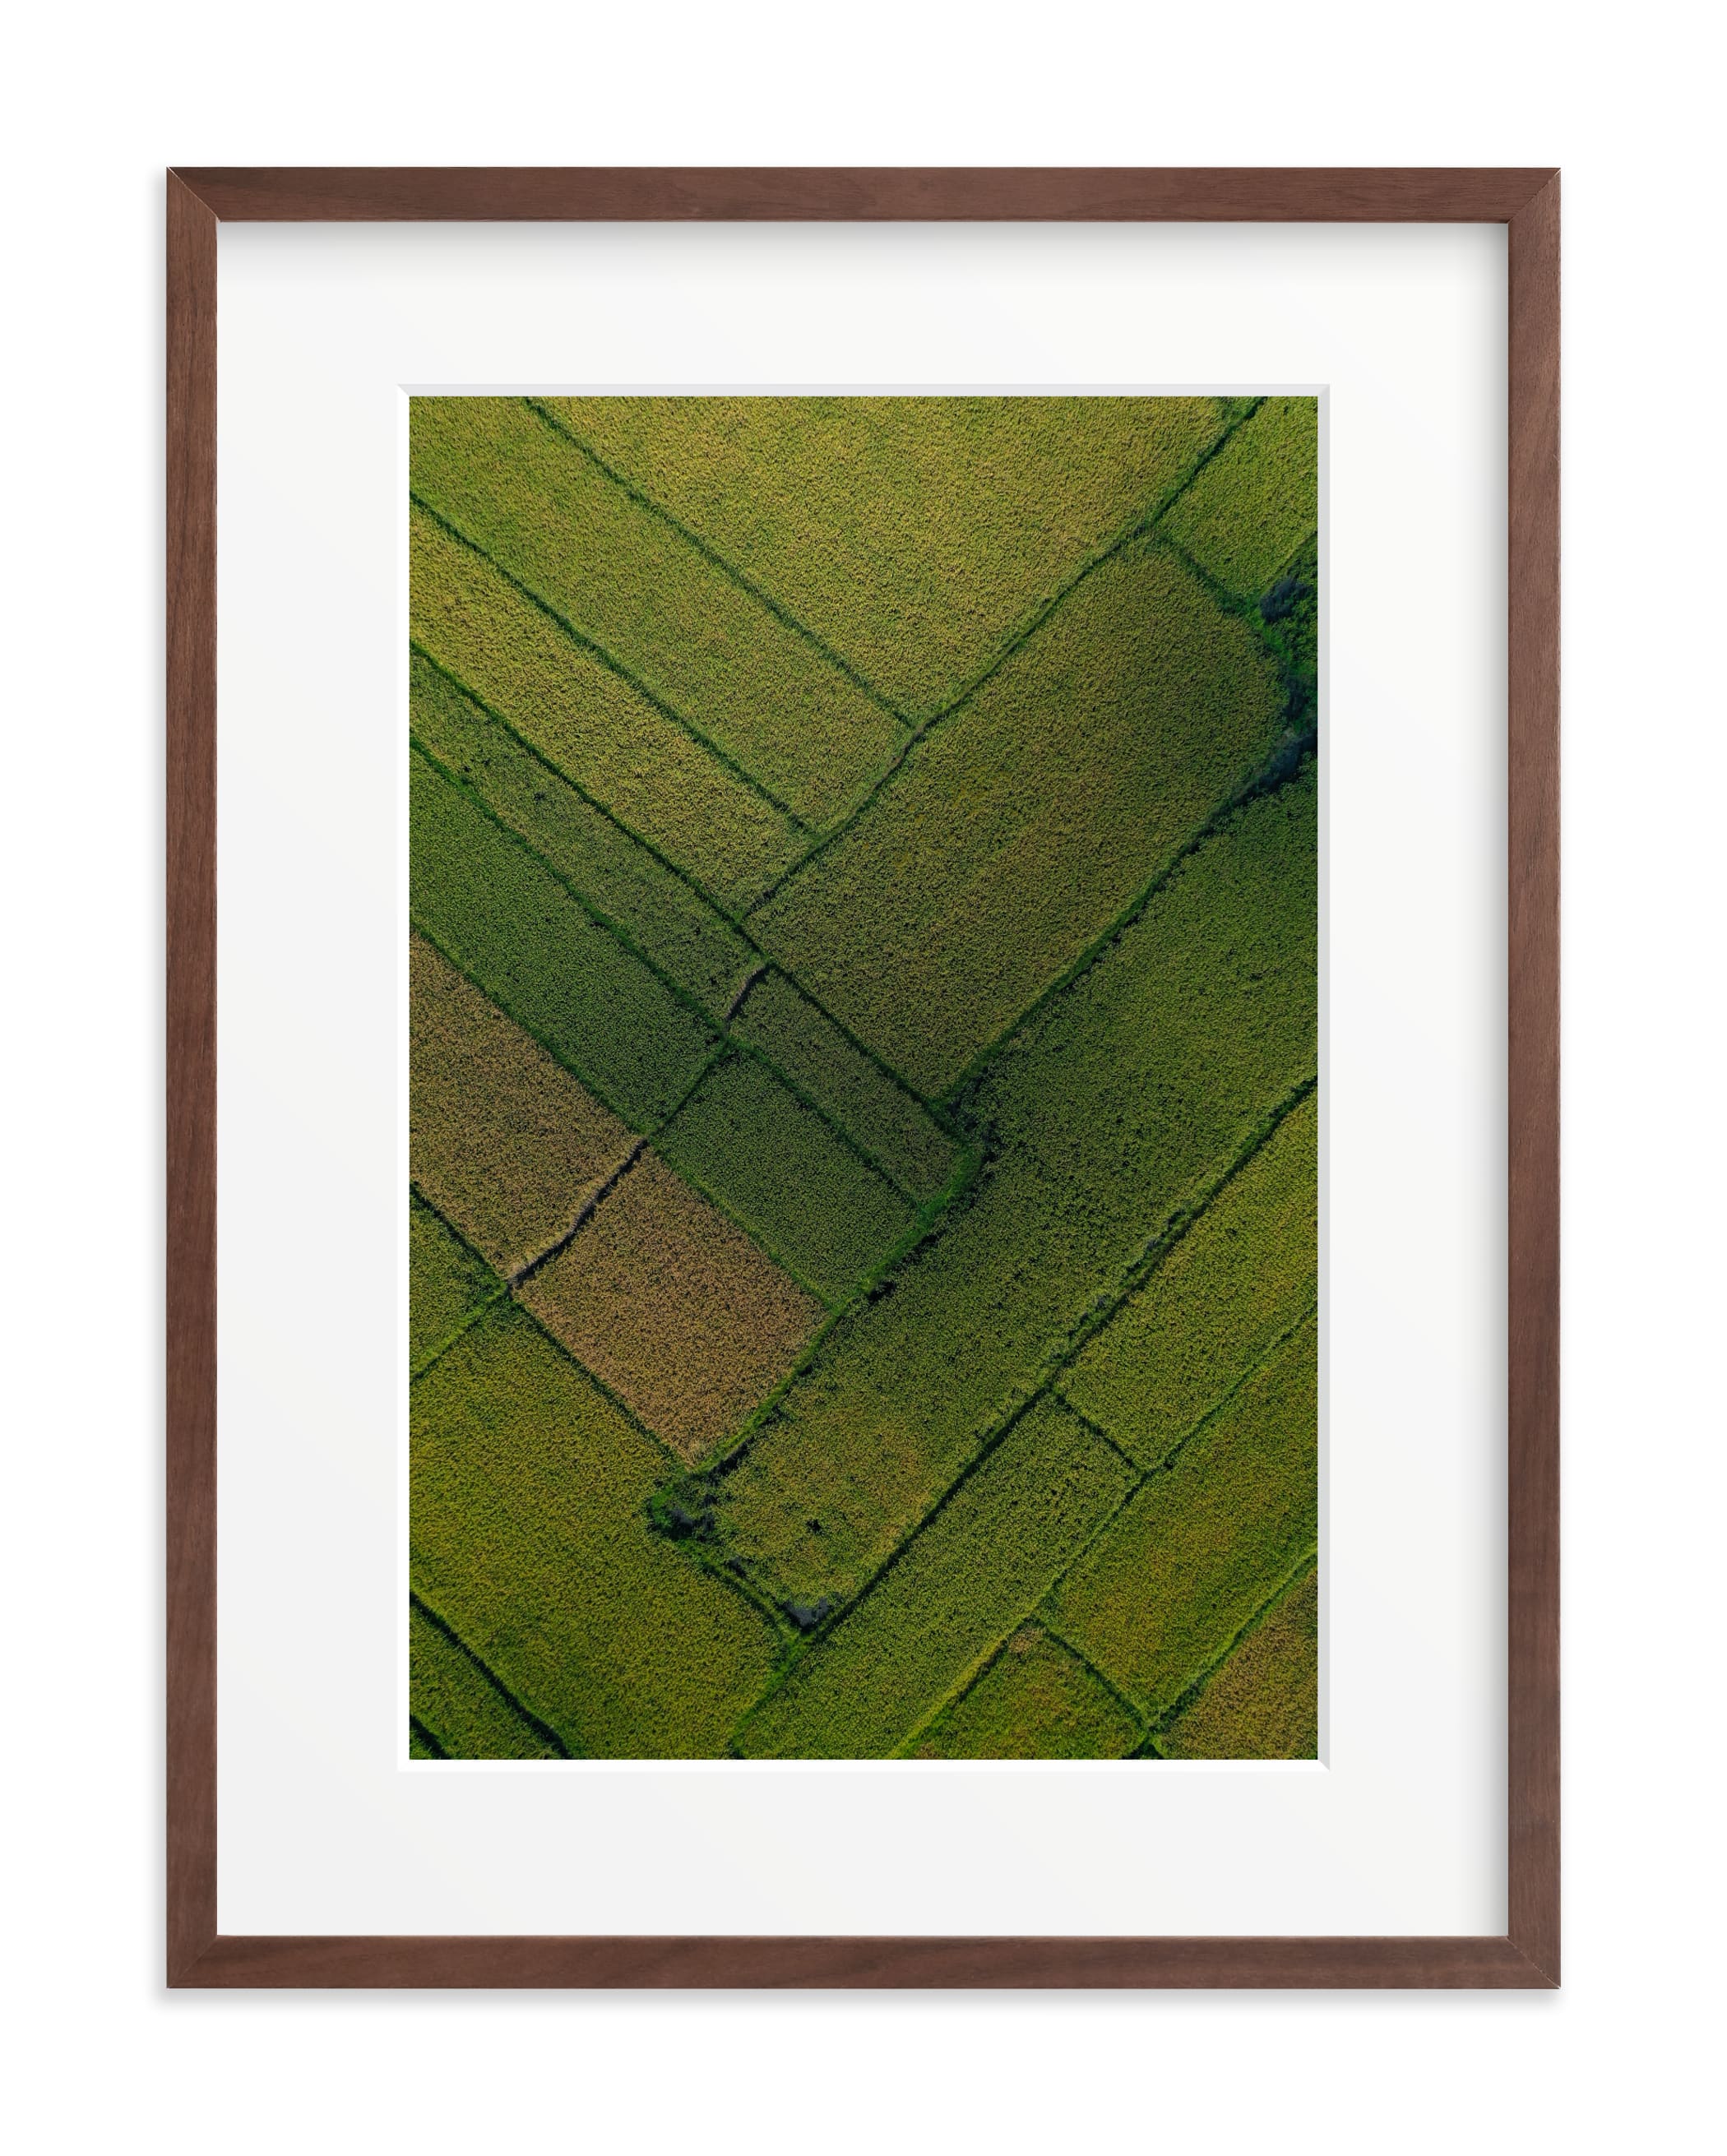 Above the Paddy Wall Art Print